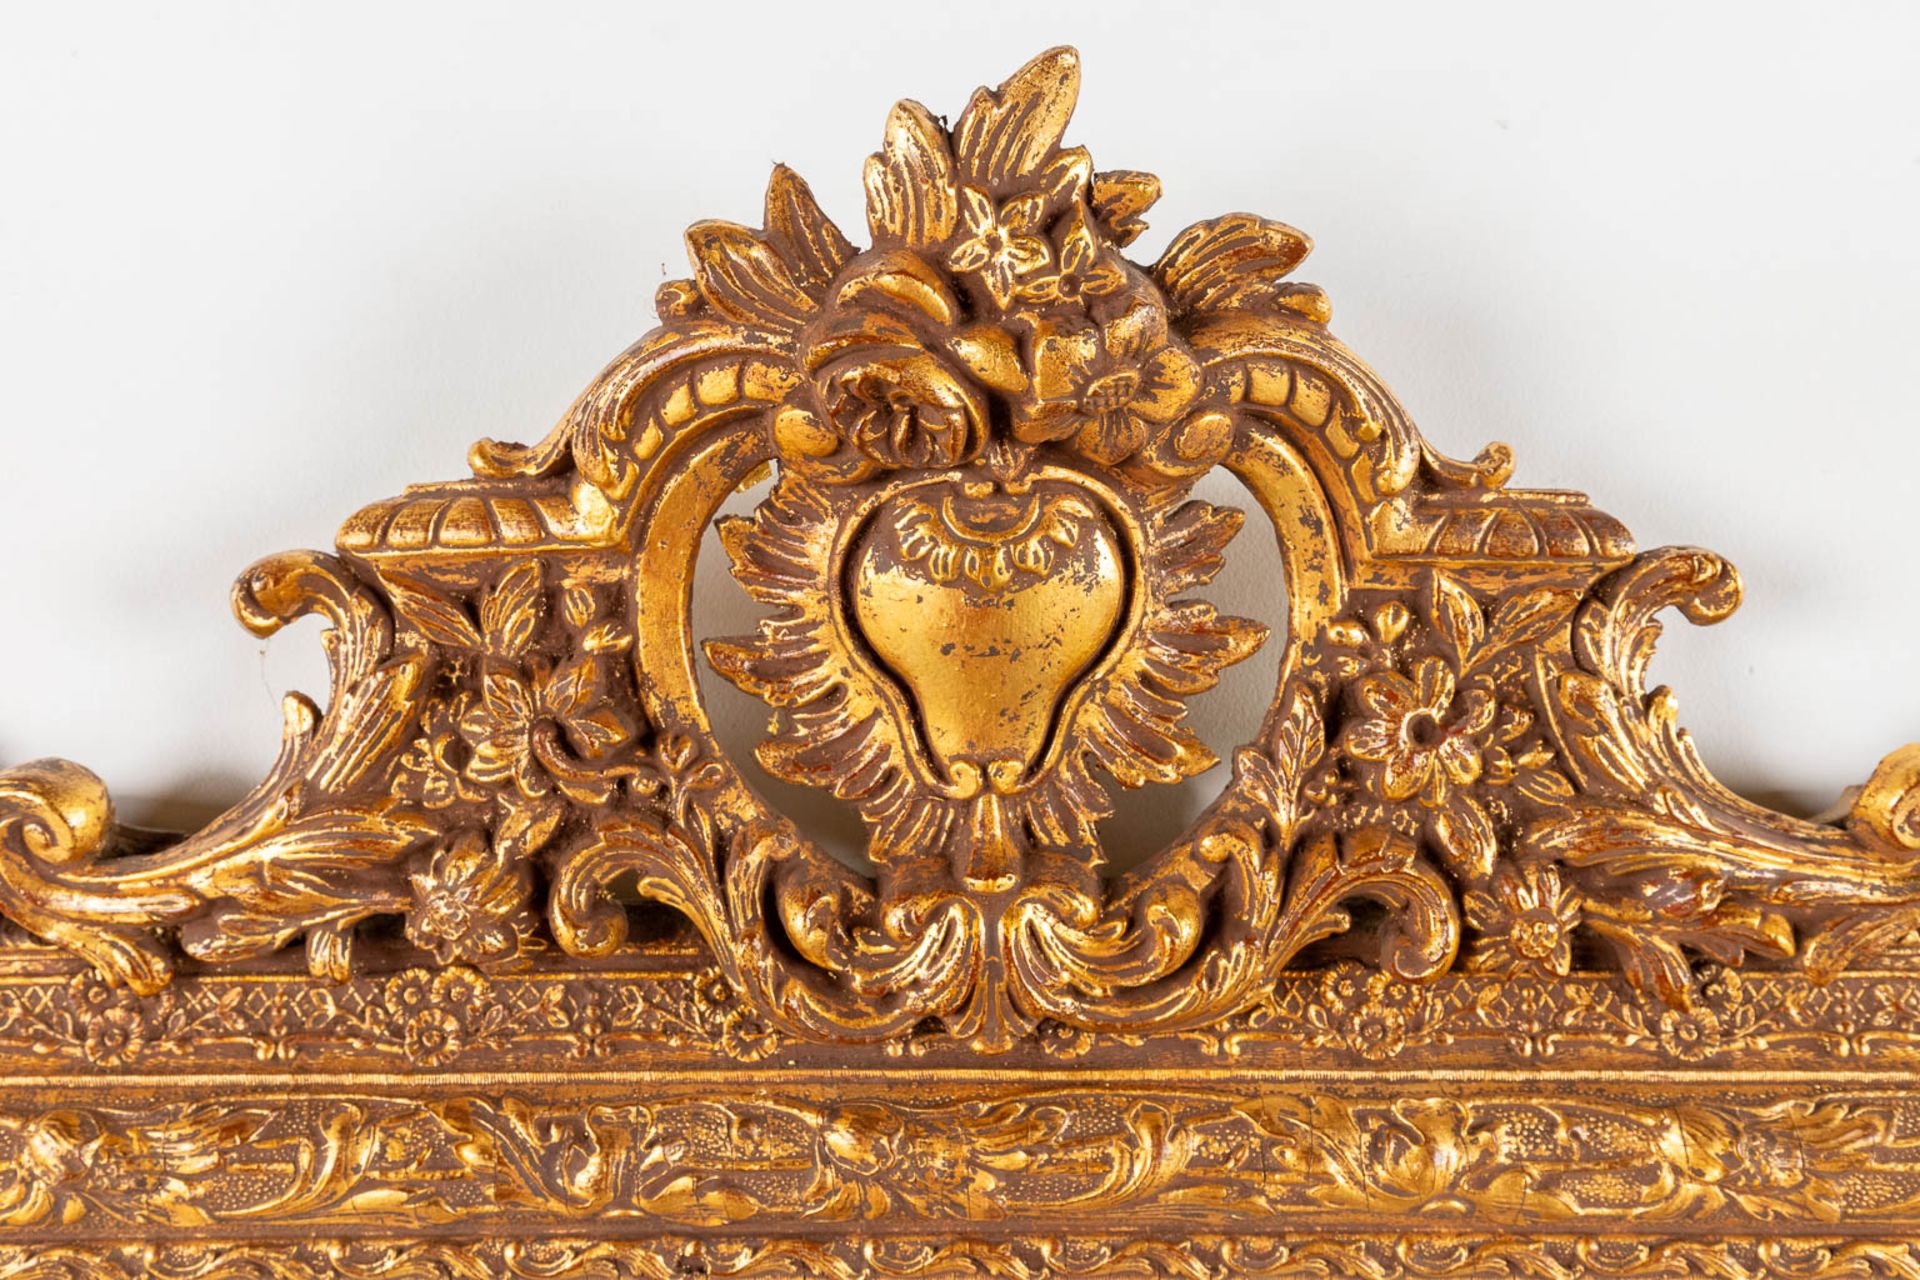 A mirror, sculptured wood and gilt stucco. Circa 1900. (W:135 x H:85 cm) - Image 3 of 8